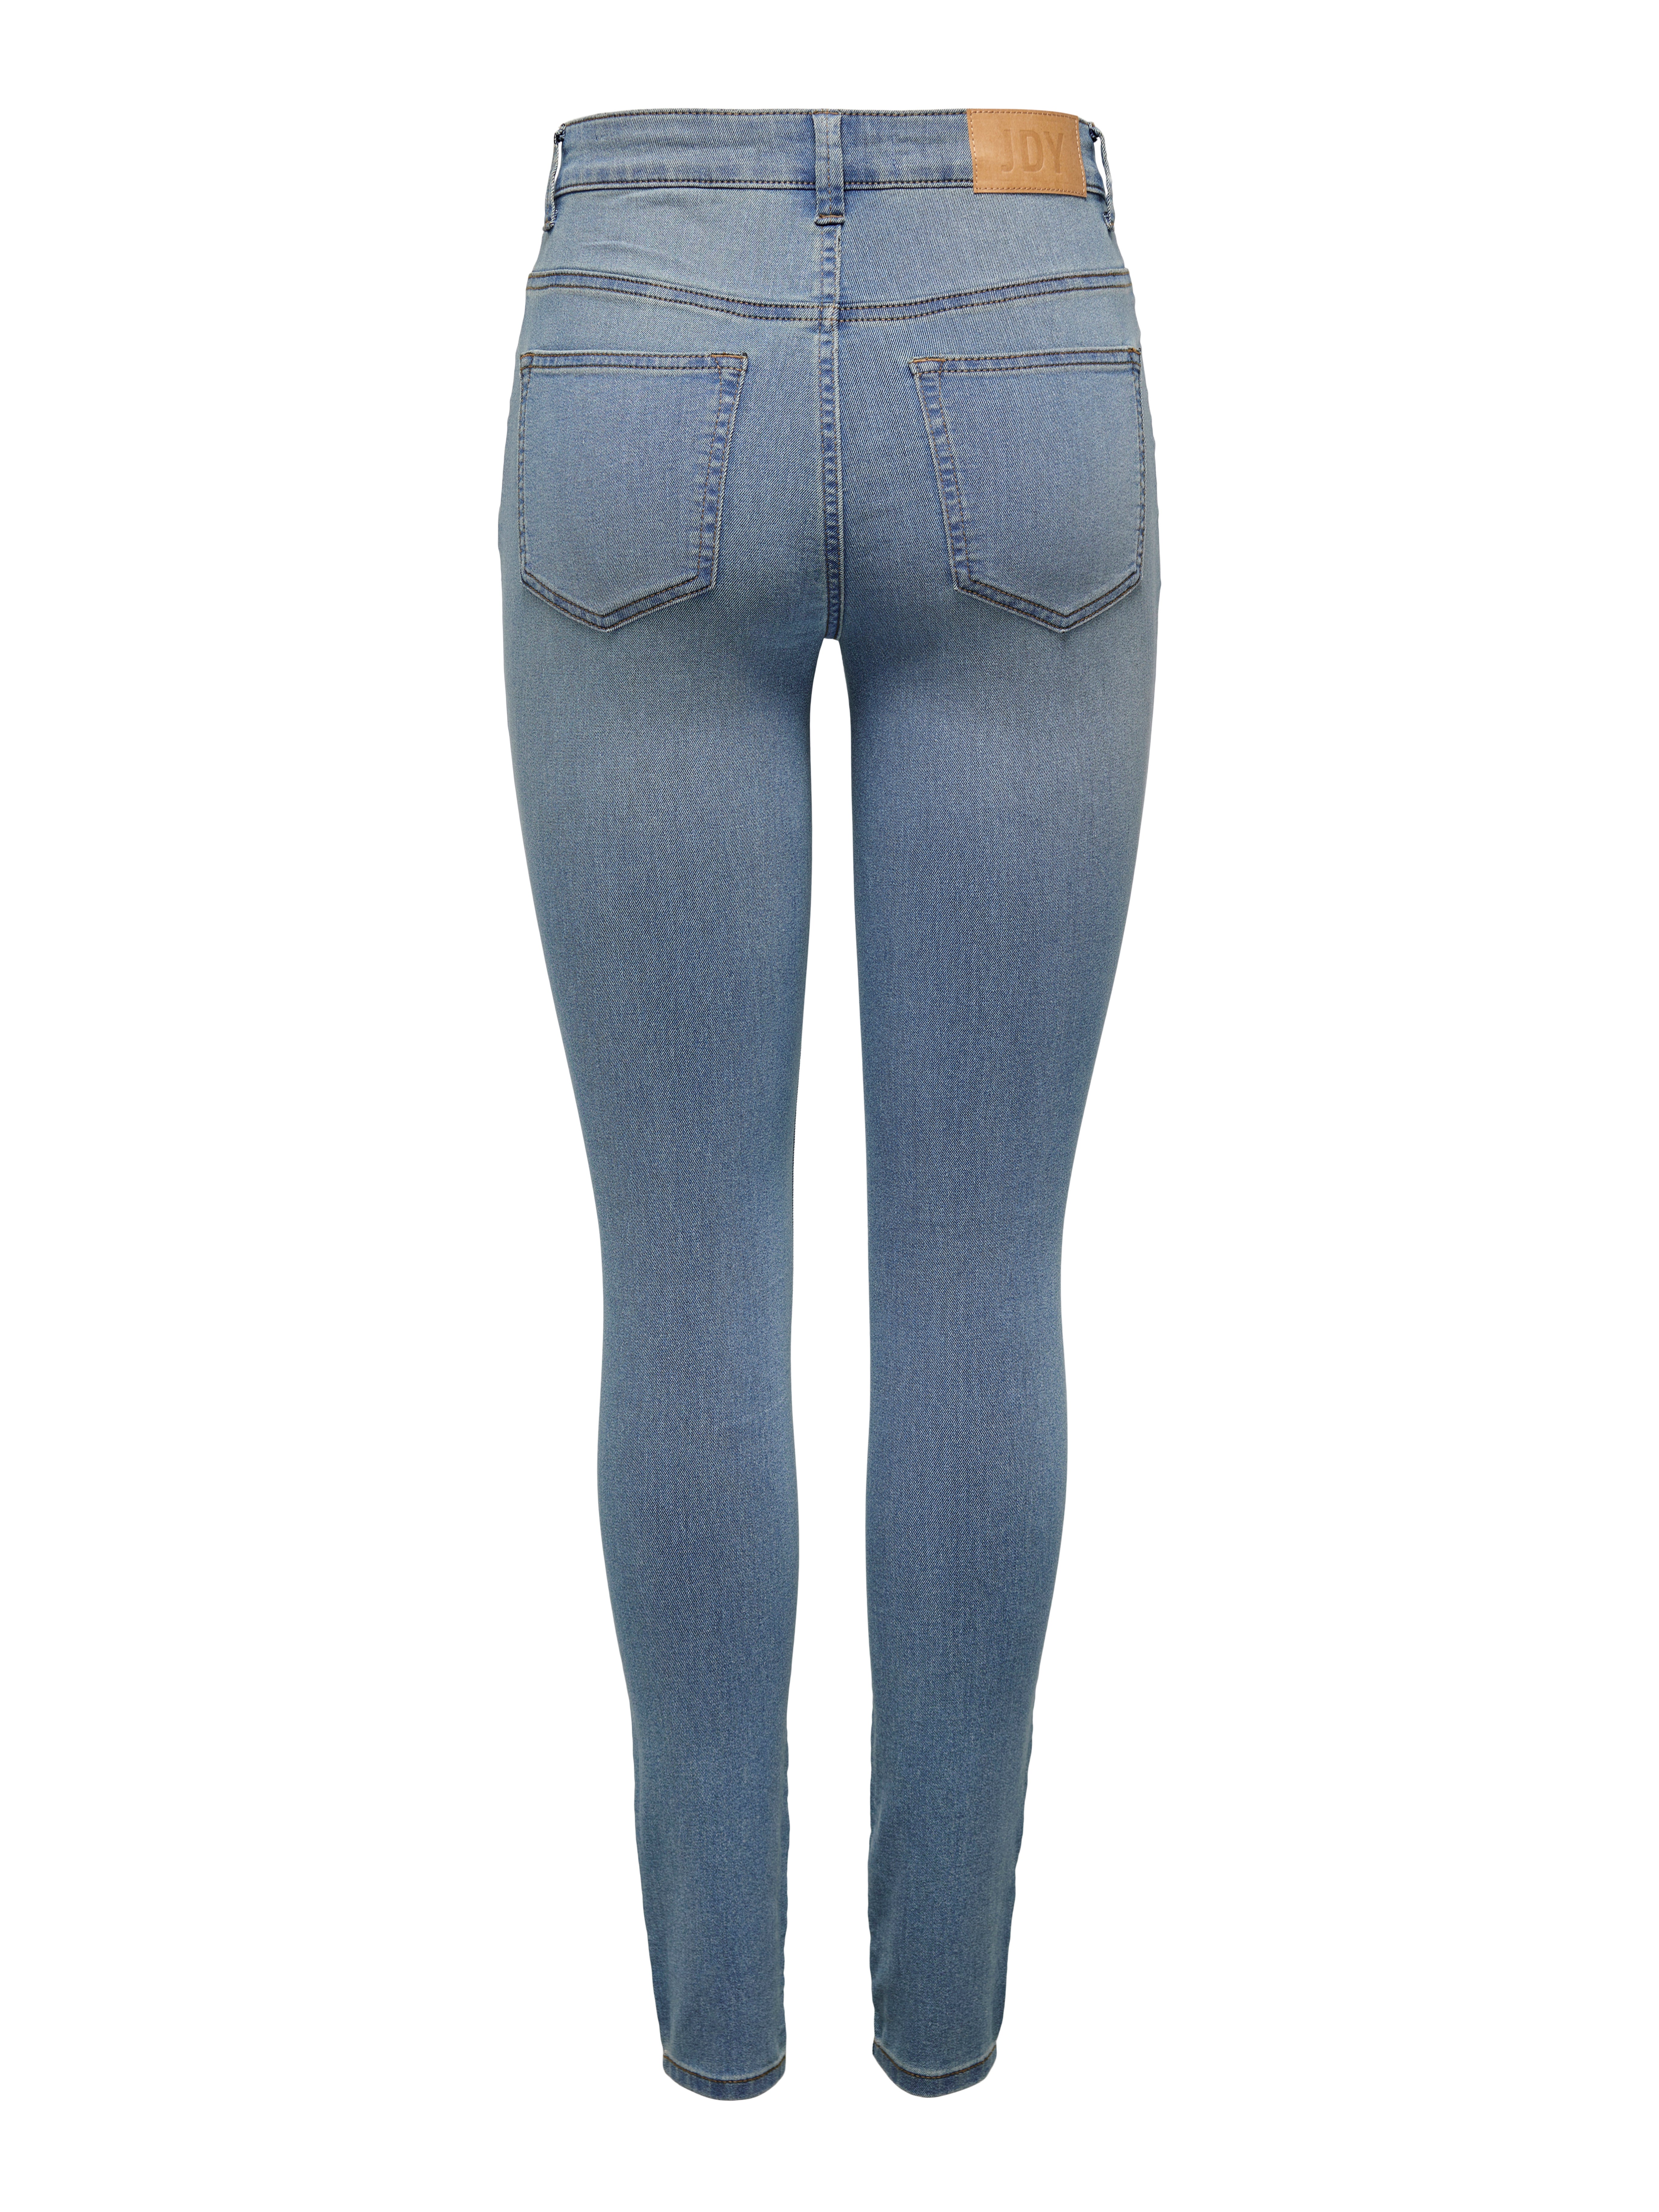 Aria Skinny Jeans - Just For You